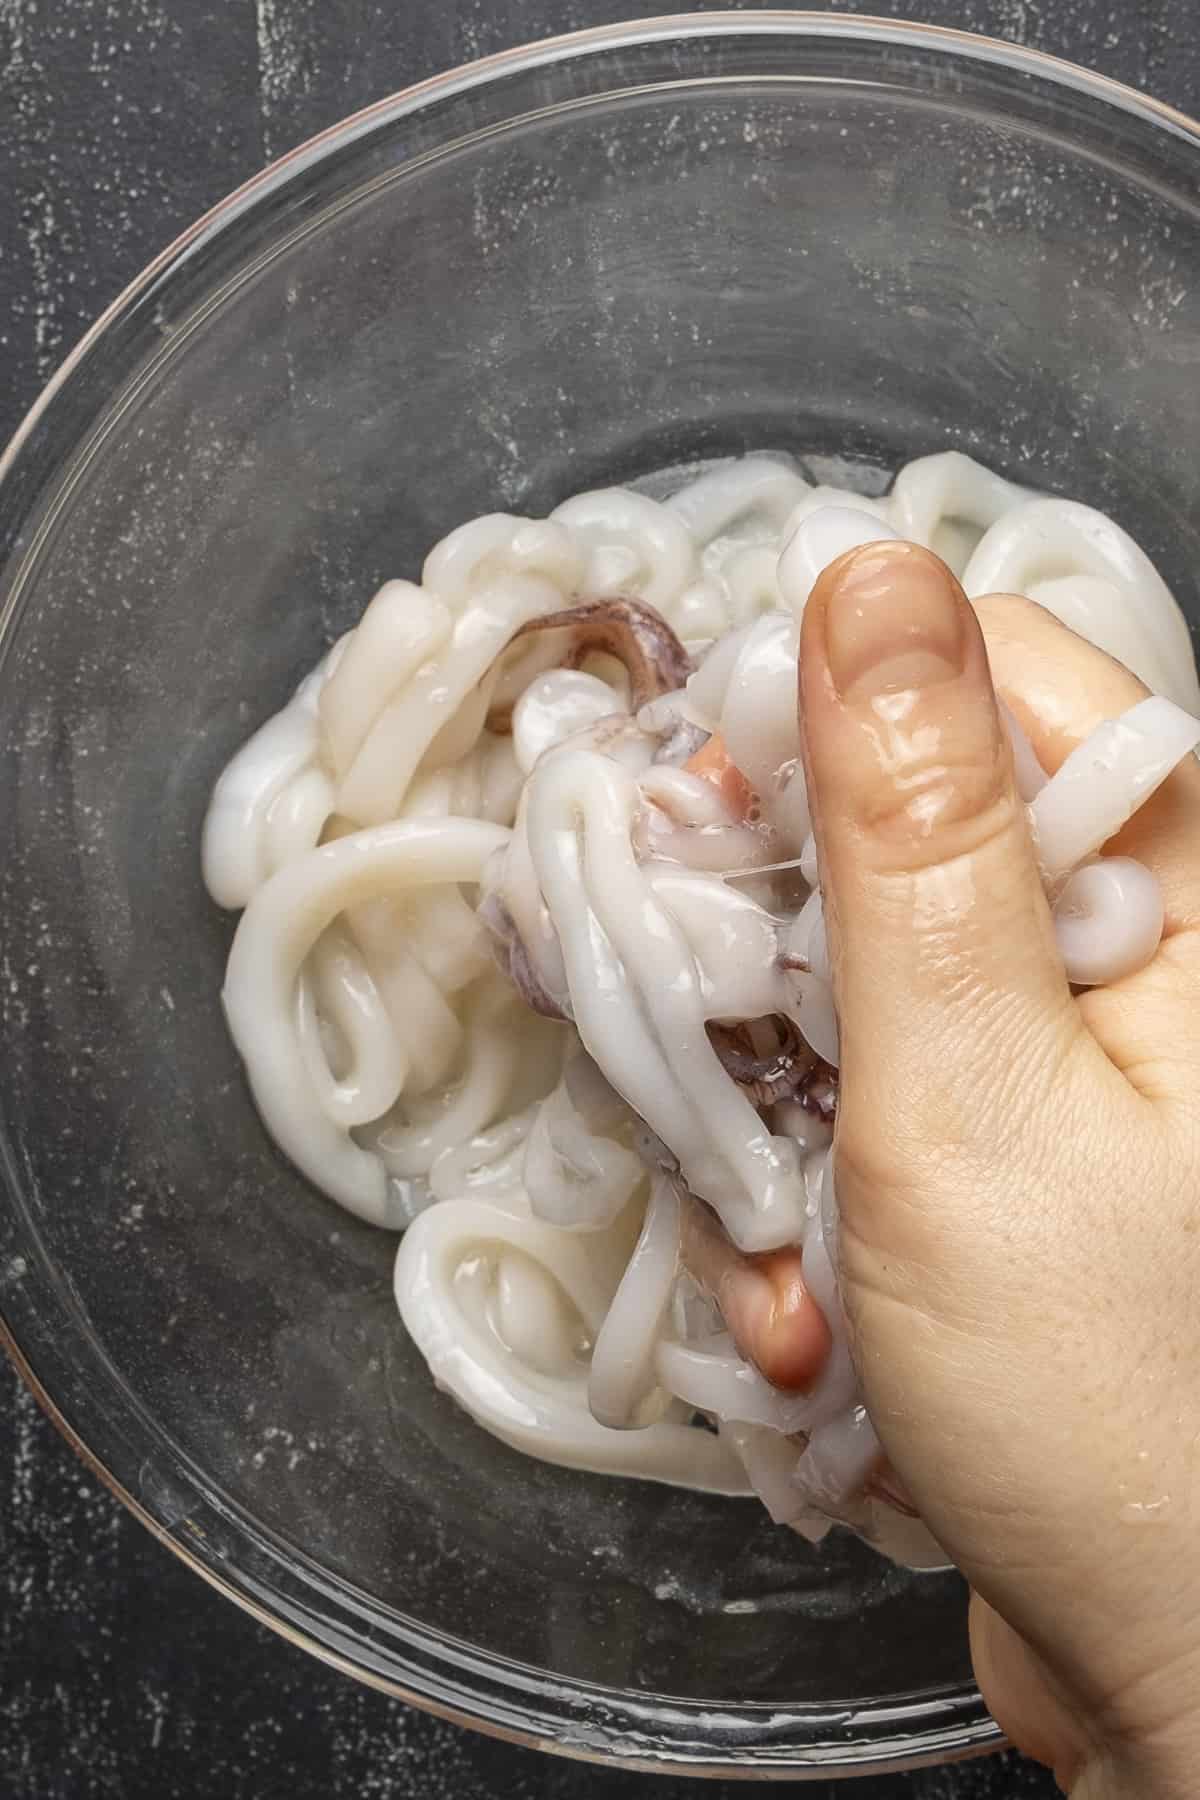 A hand massaging squid rings with lemon juice and baking soda.